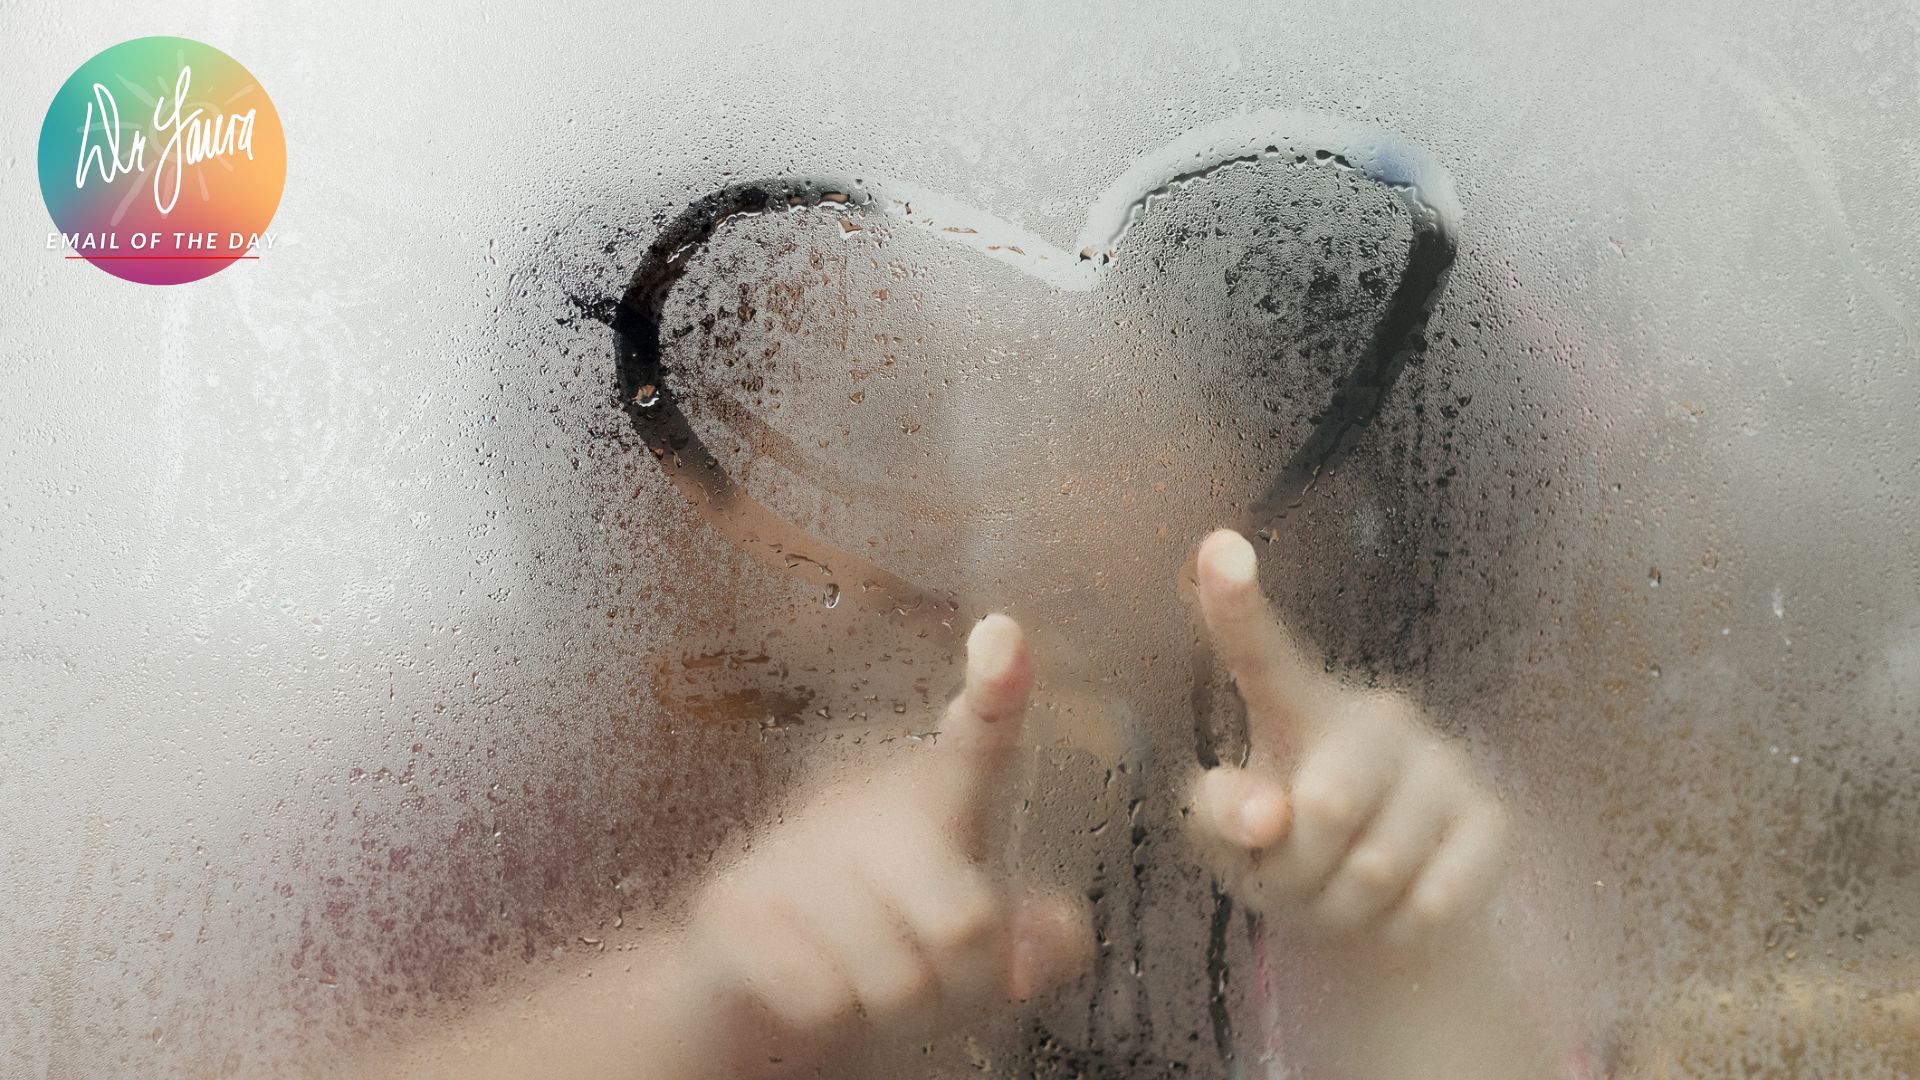 Two people draw a heart on the shower door